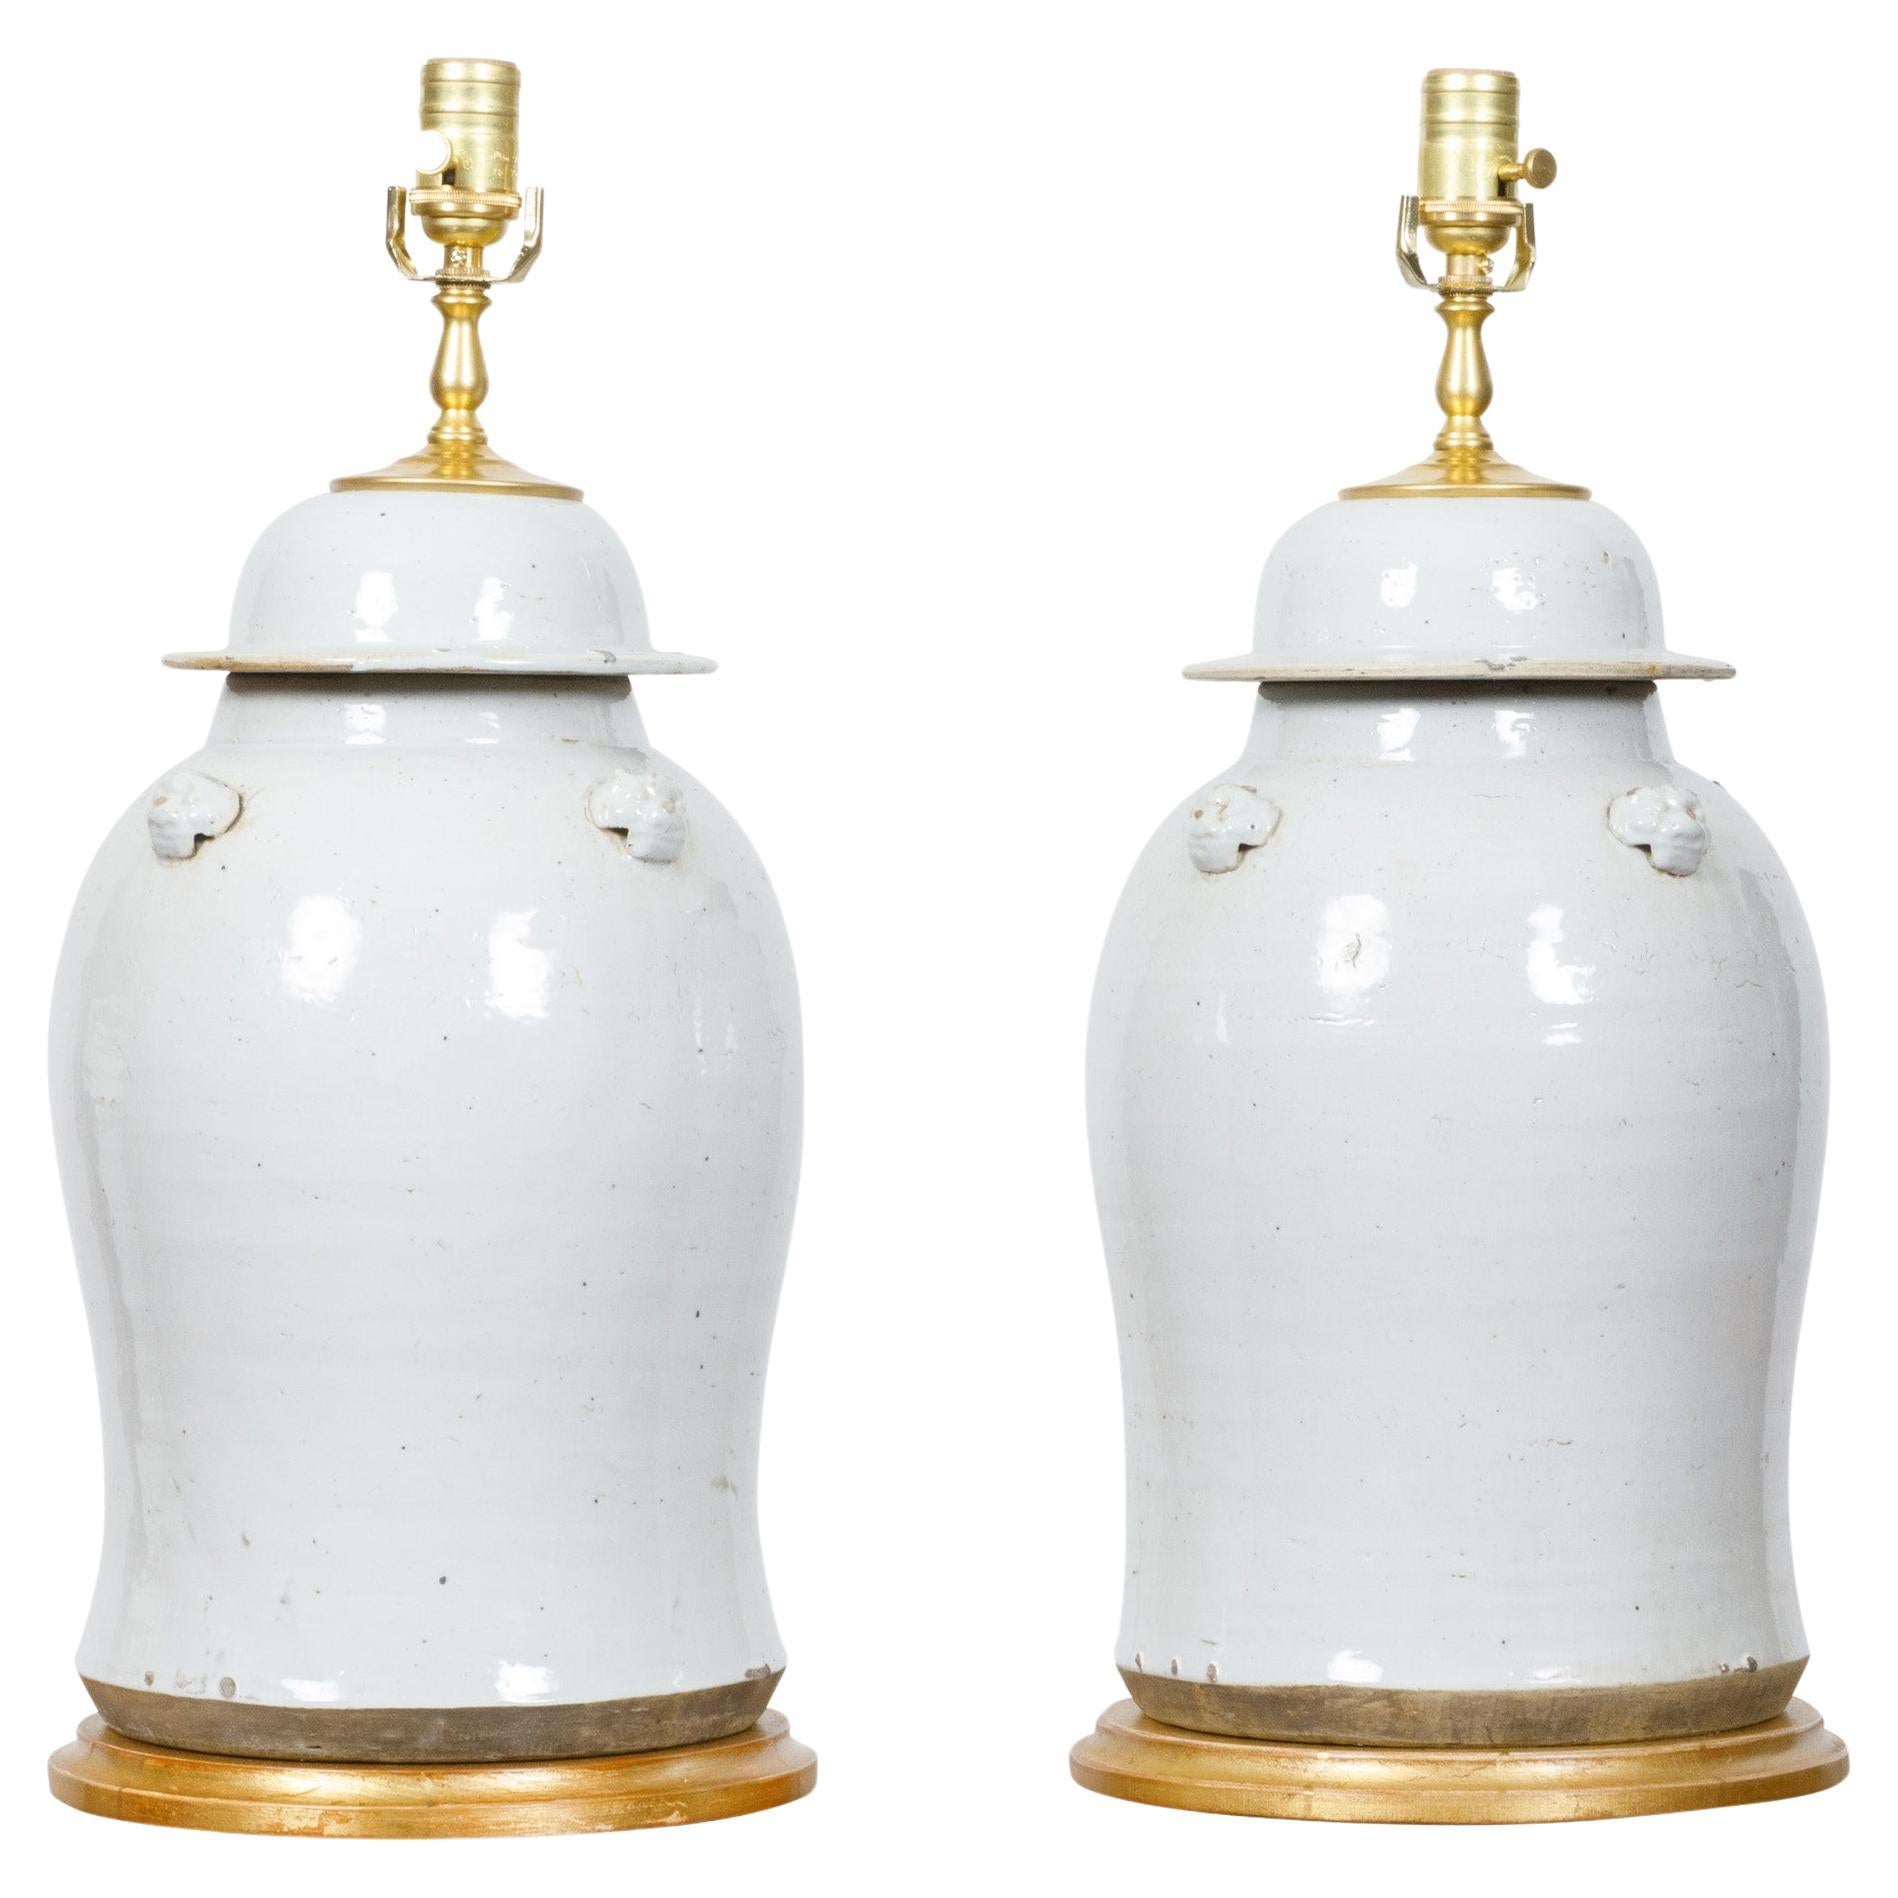 Pair of White Porcelain Lidded Urns Made into US-Wired Table Lamps on Gilt Bases